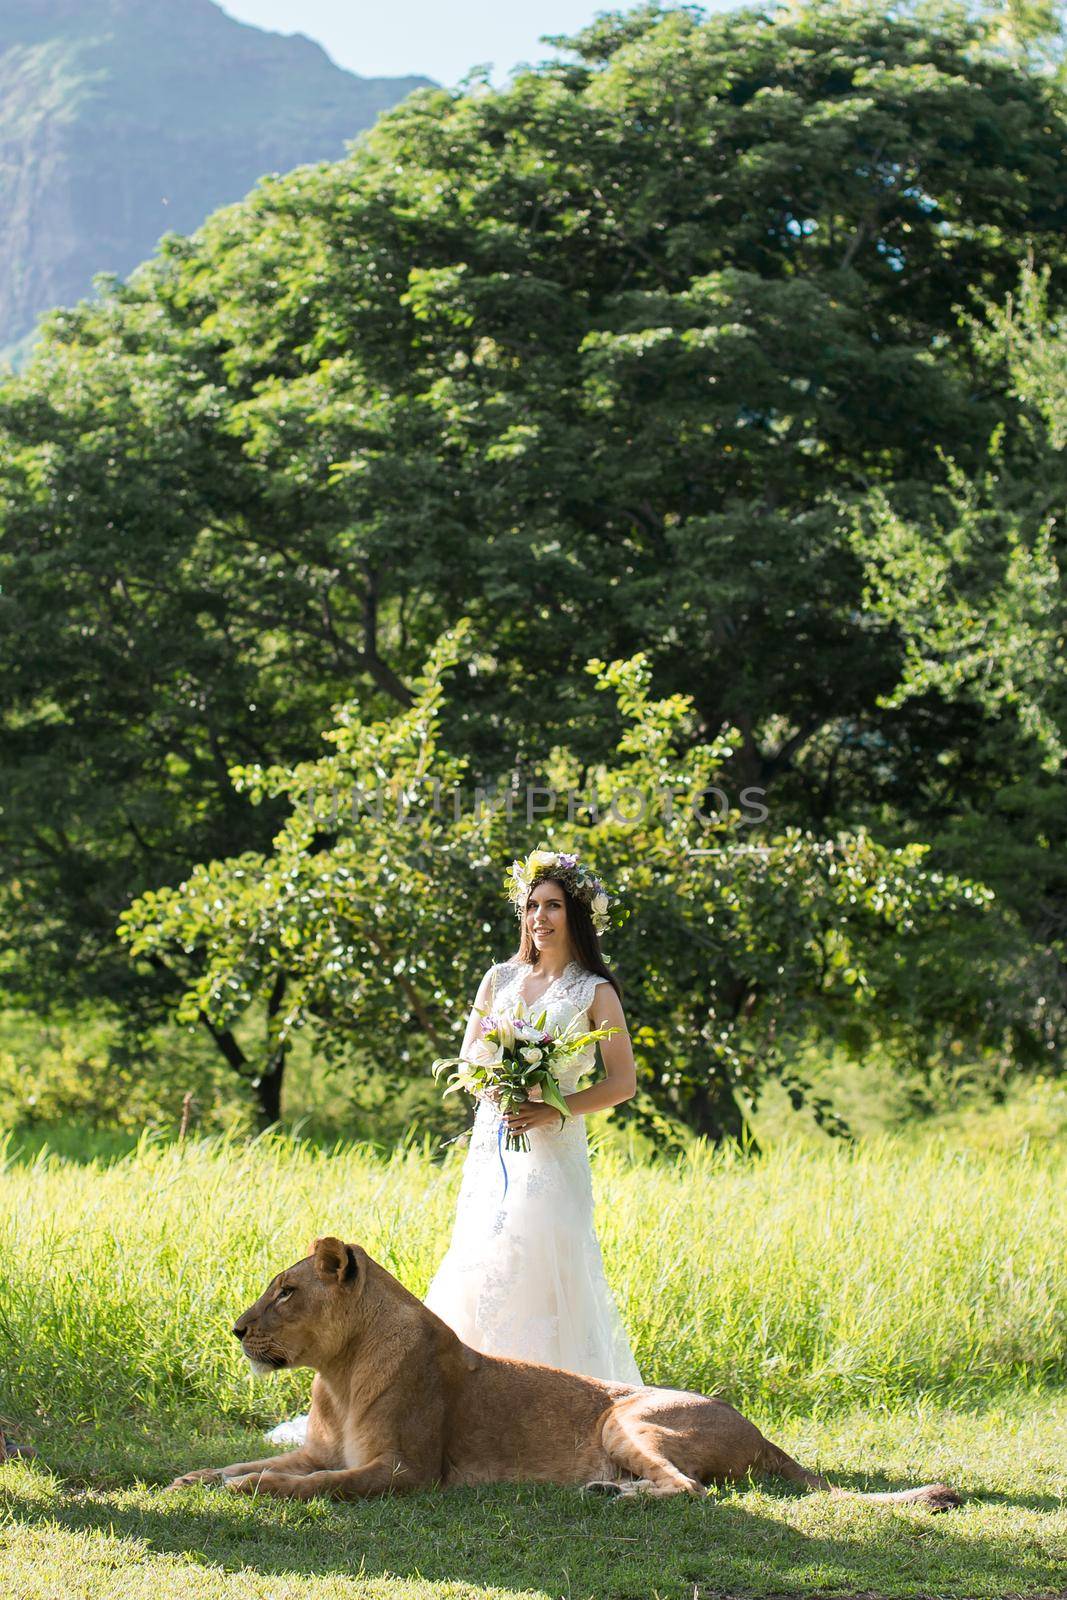 Beautiful bride and a lioness in the picturesque nature. by StudioPeace